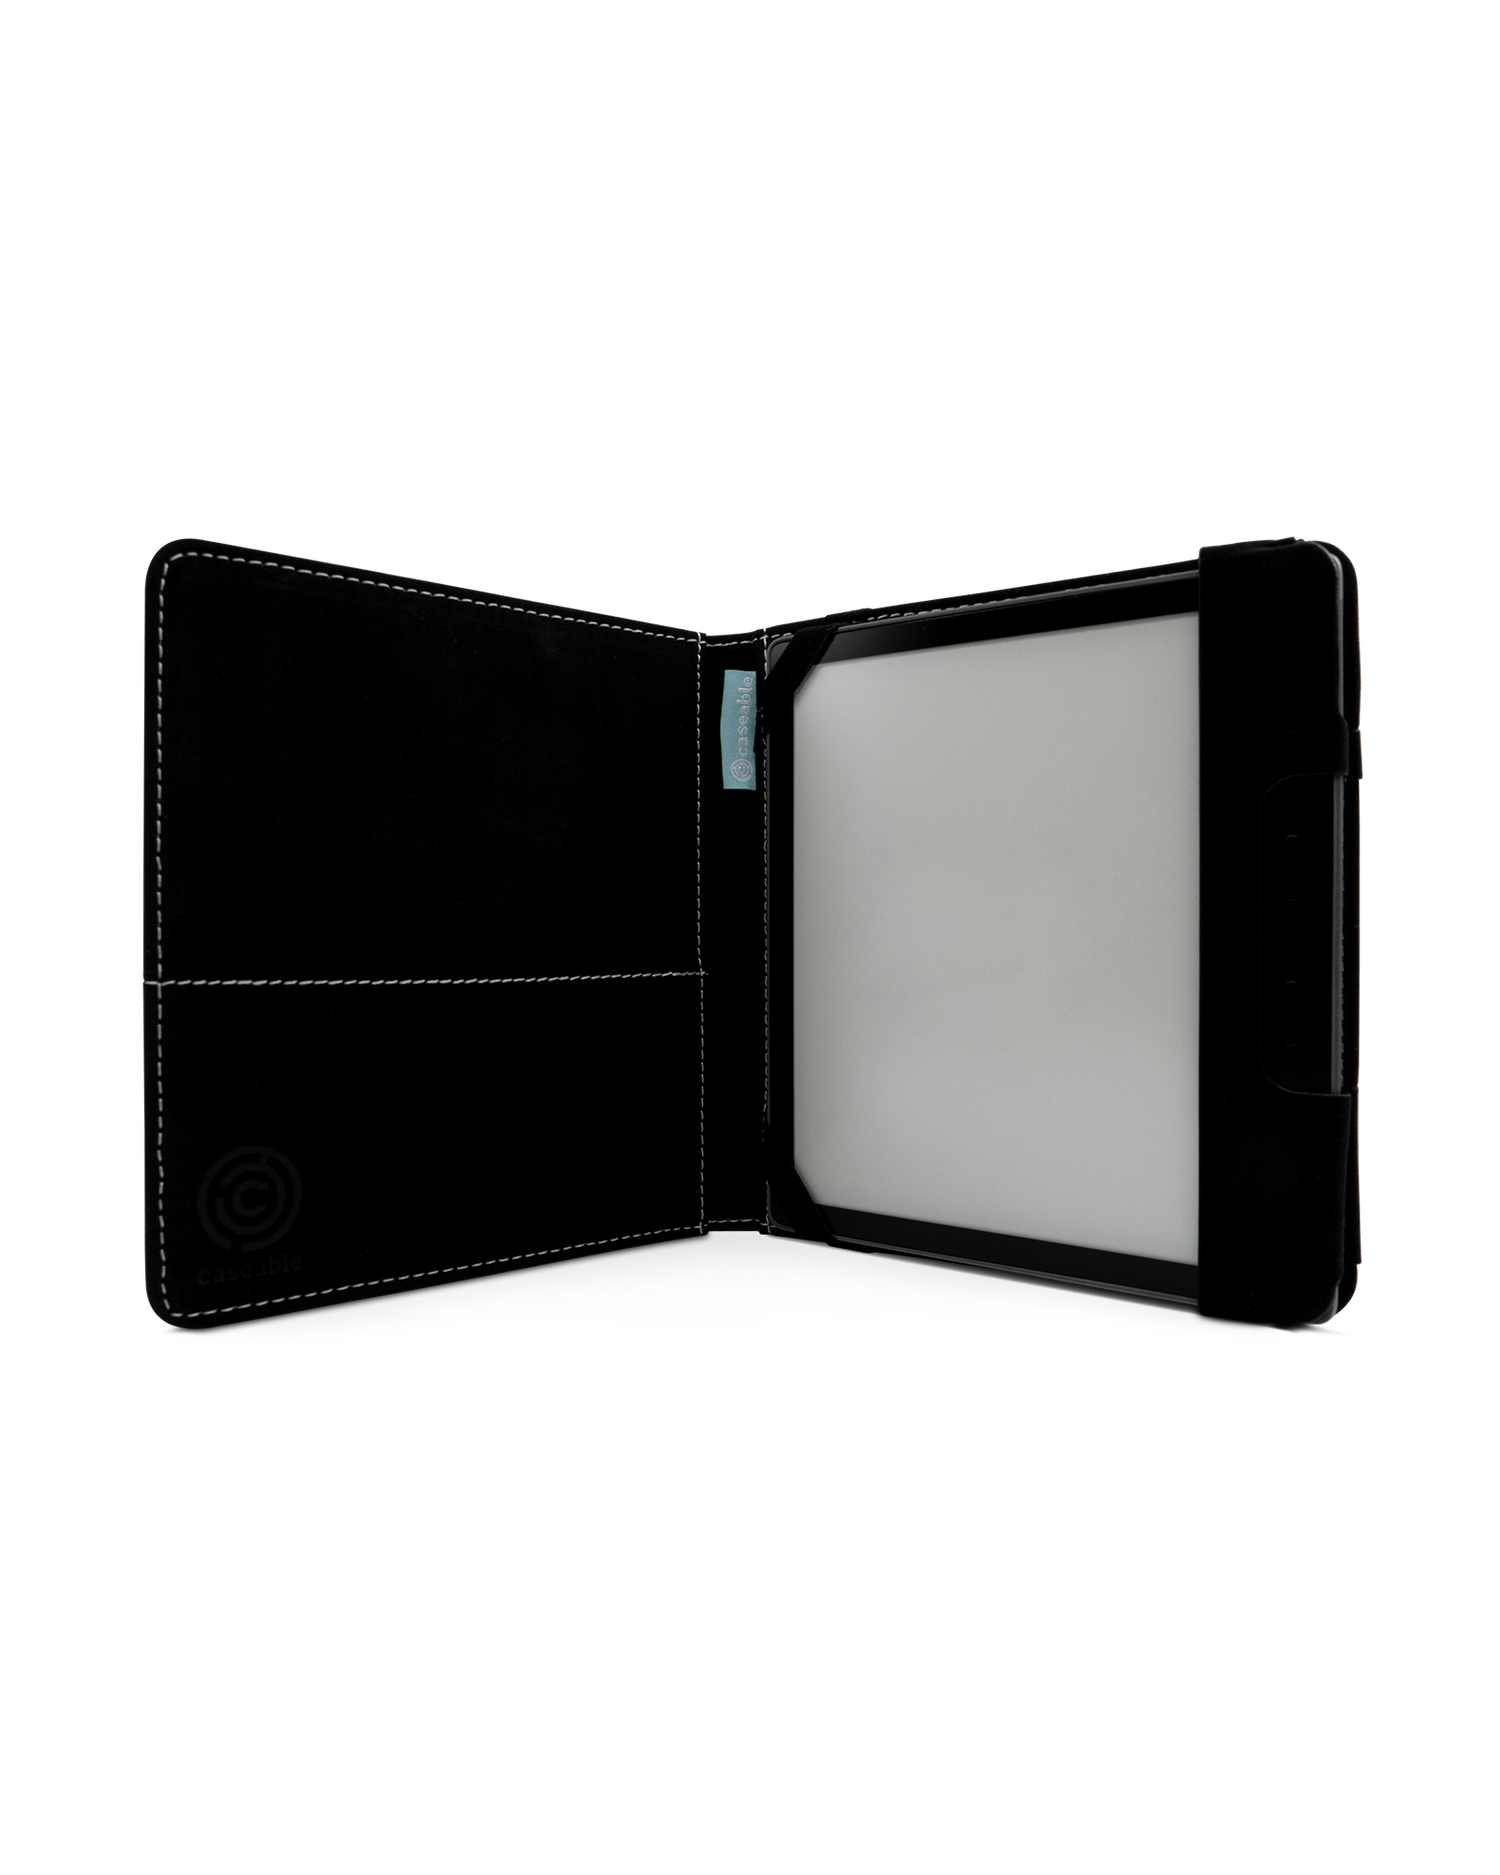 Carbon II eReader Case for tolino vision 6: Opened interior view